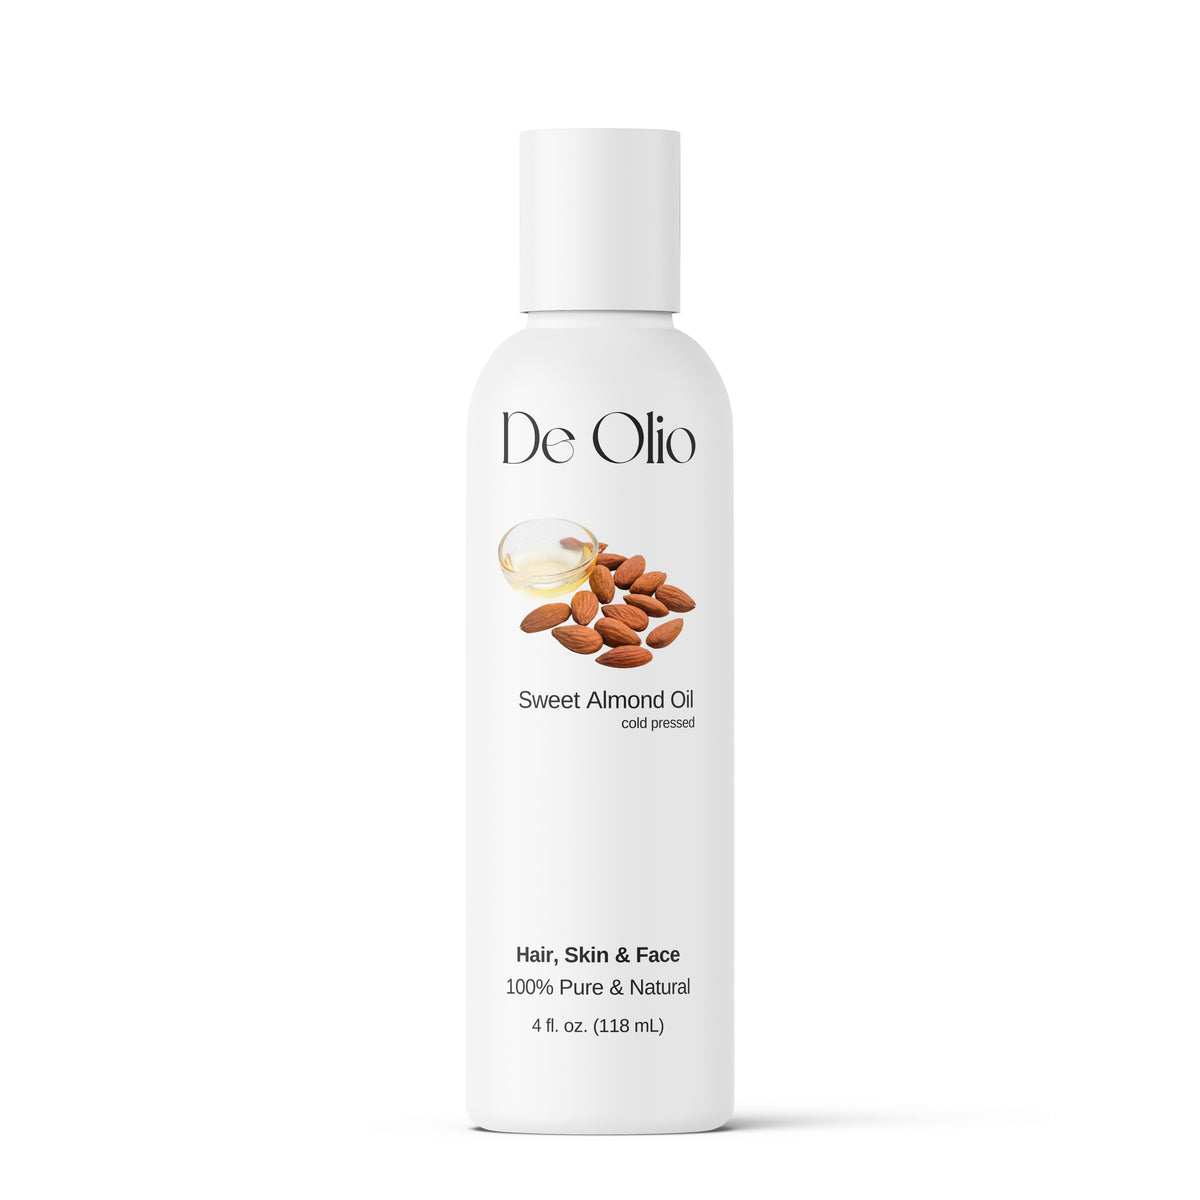 De Olio | Sweet Almond Oil | 100% Pure and Natural | Cold Pressed | Refined |100% Pure Moisturizing Oil | Skin, Hair & Face | Carrier Oil | Soap Making